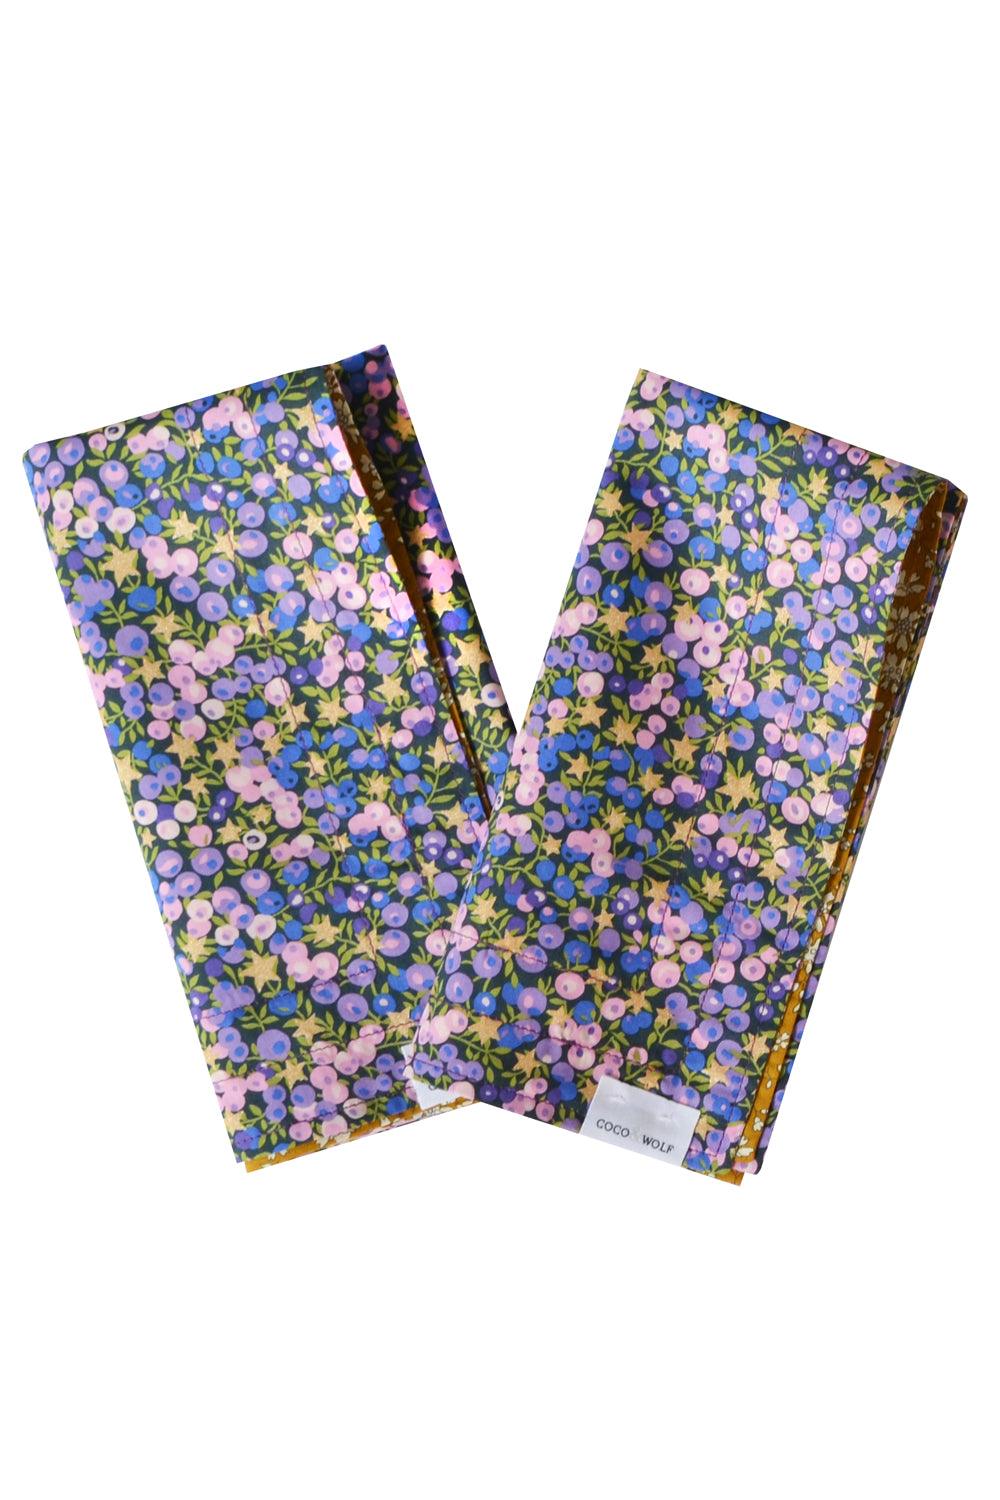 Reversible Stitch Napkin Set made with Liberty Fabric WILTSHIRE STAR & CAPEL - Coco & Wolf